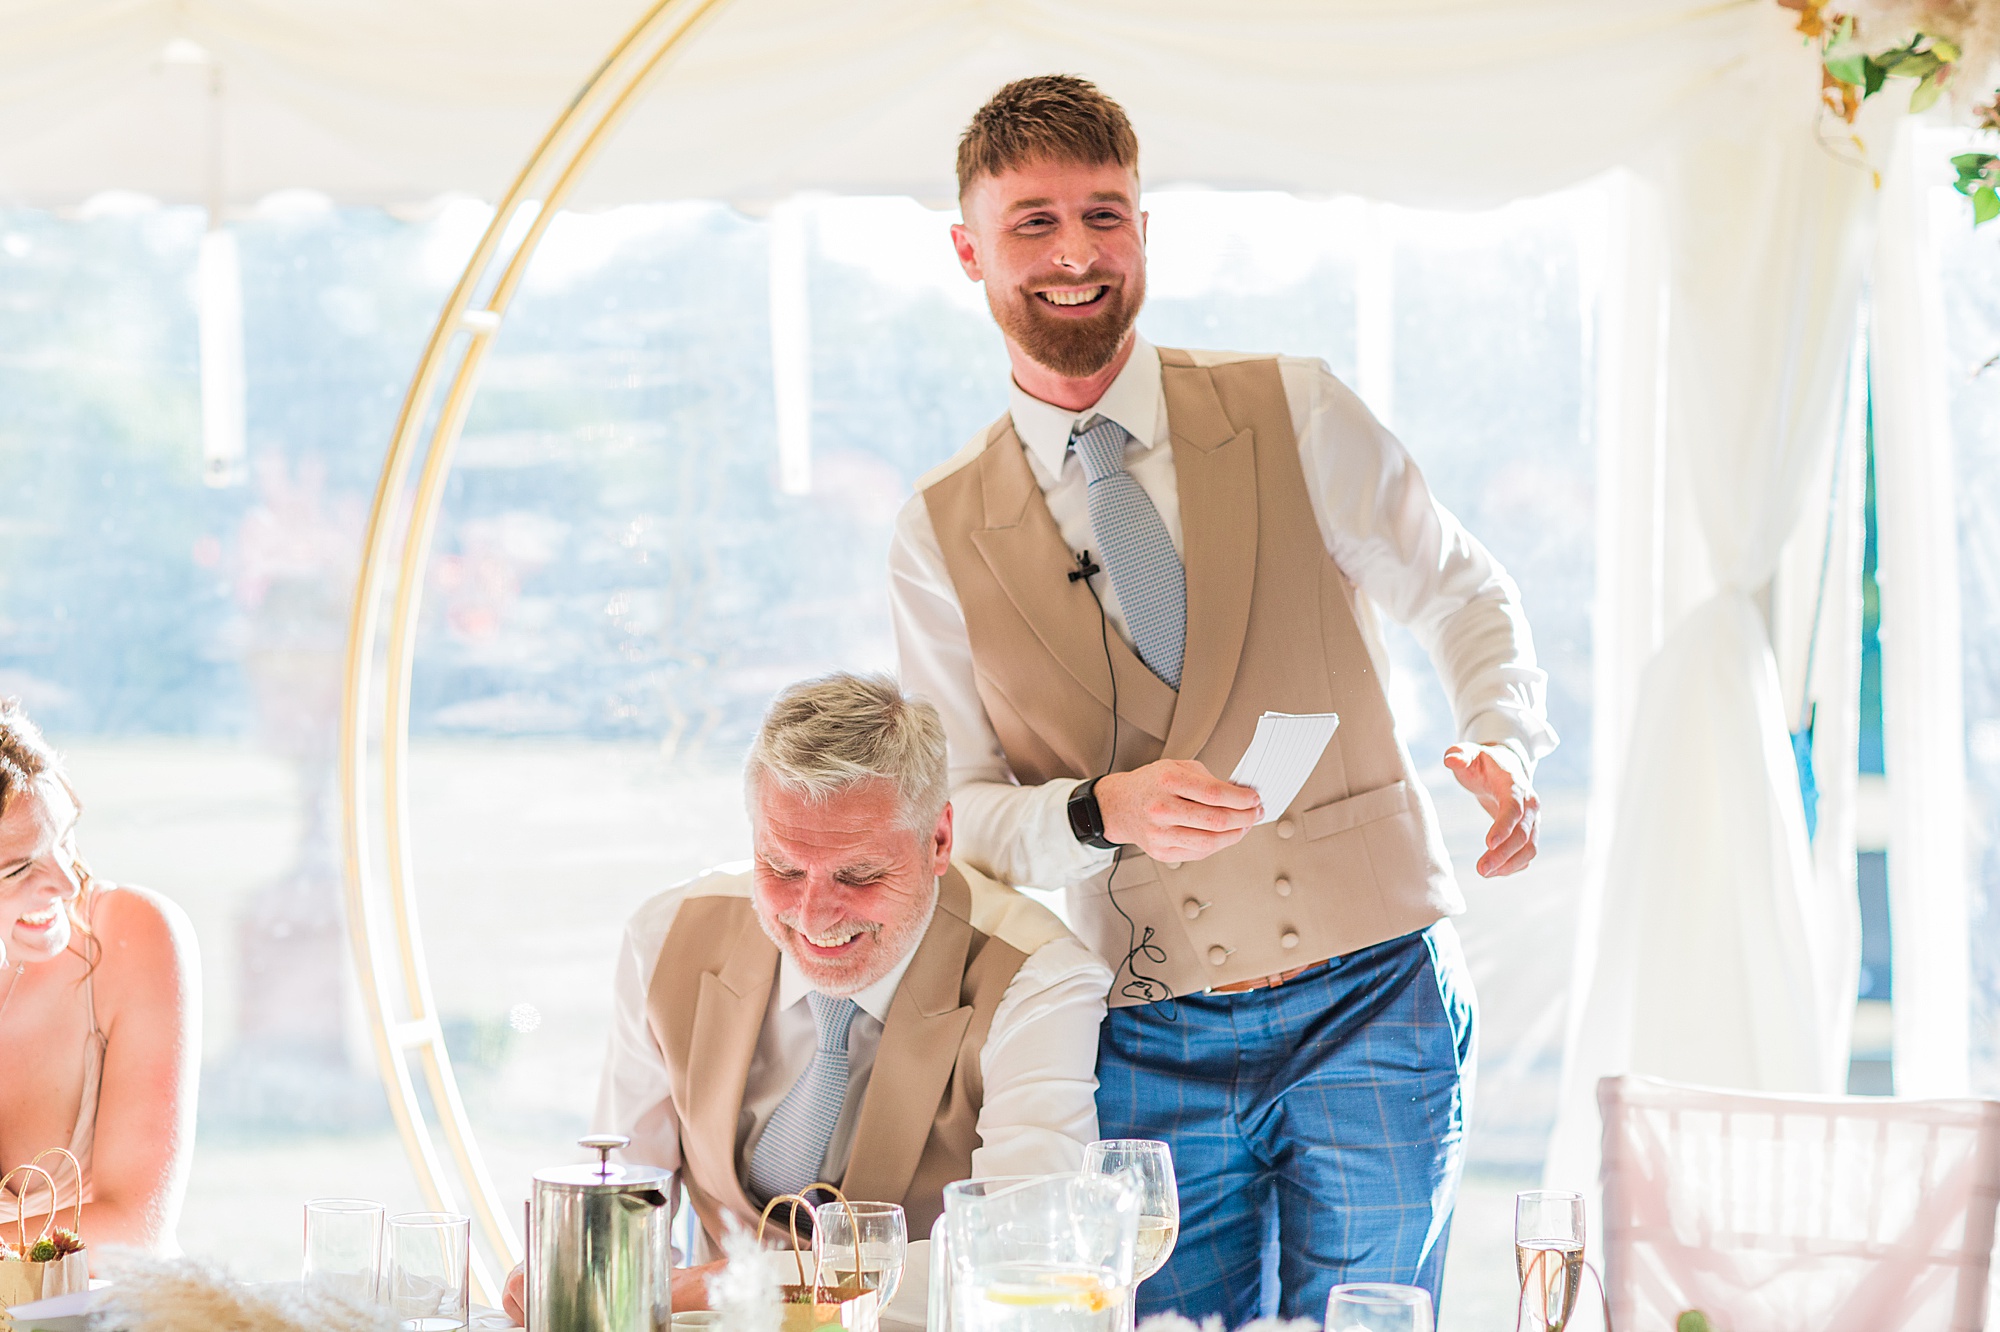 Photo shows the groom and his best man laughing/joking together during the best man's speech at a wedding 